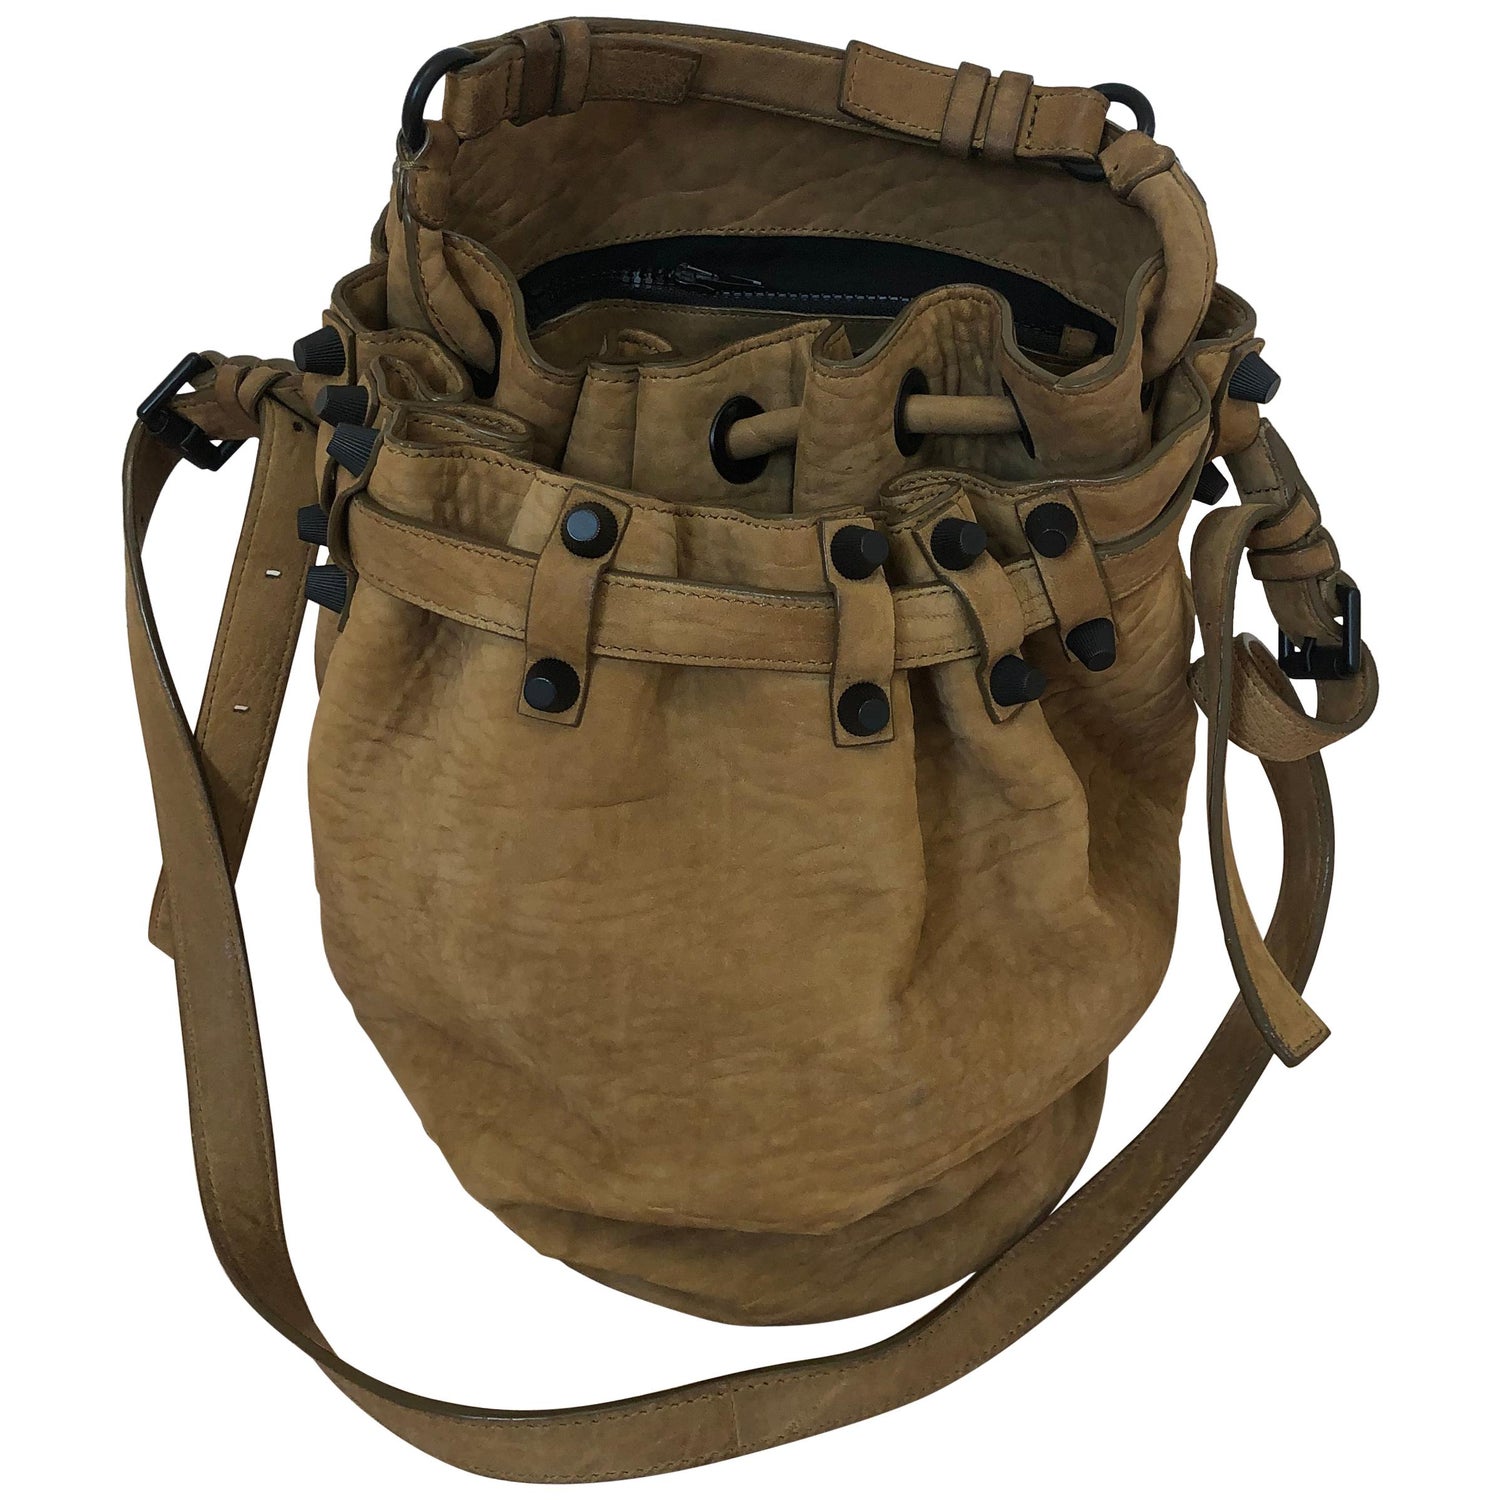 Alexander Wang "Diego" Suede Studded Bucket Bag in Taupe/Camel w/Dust Bag  at 1stDibs | alexander mcqueen continental wallet